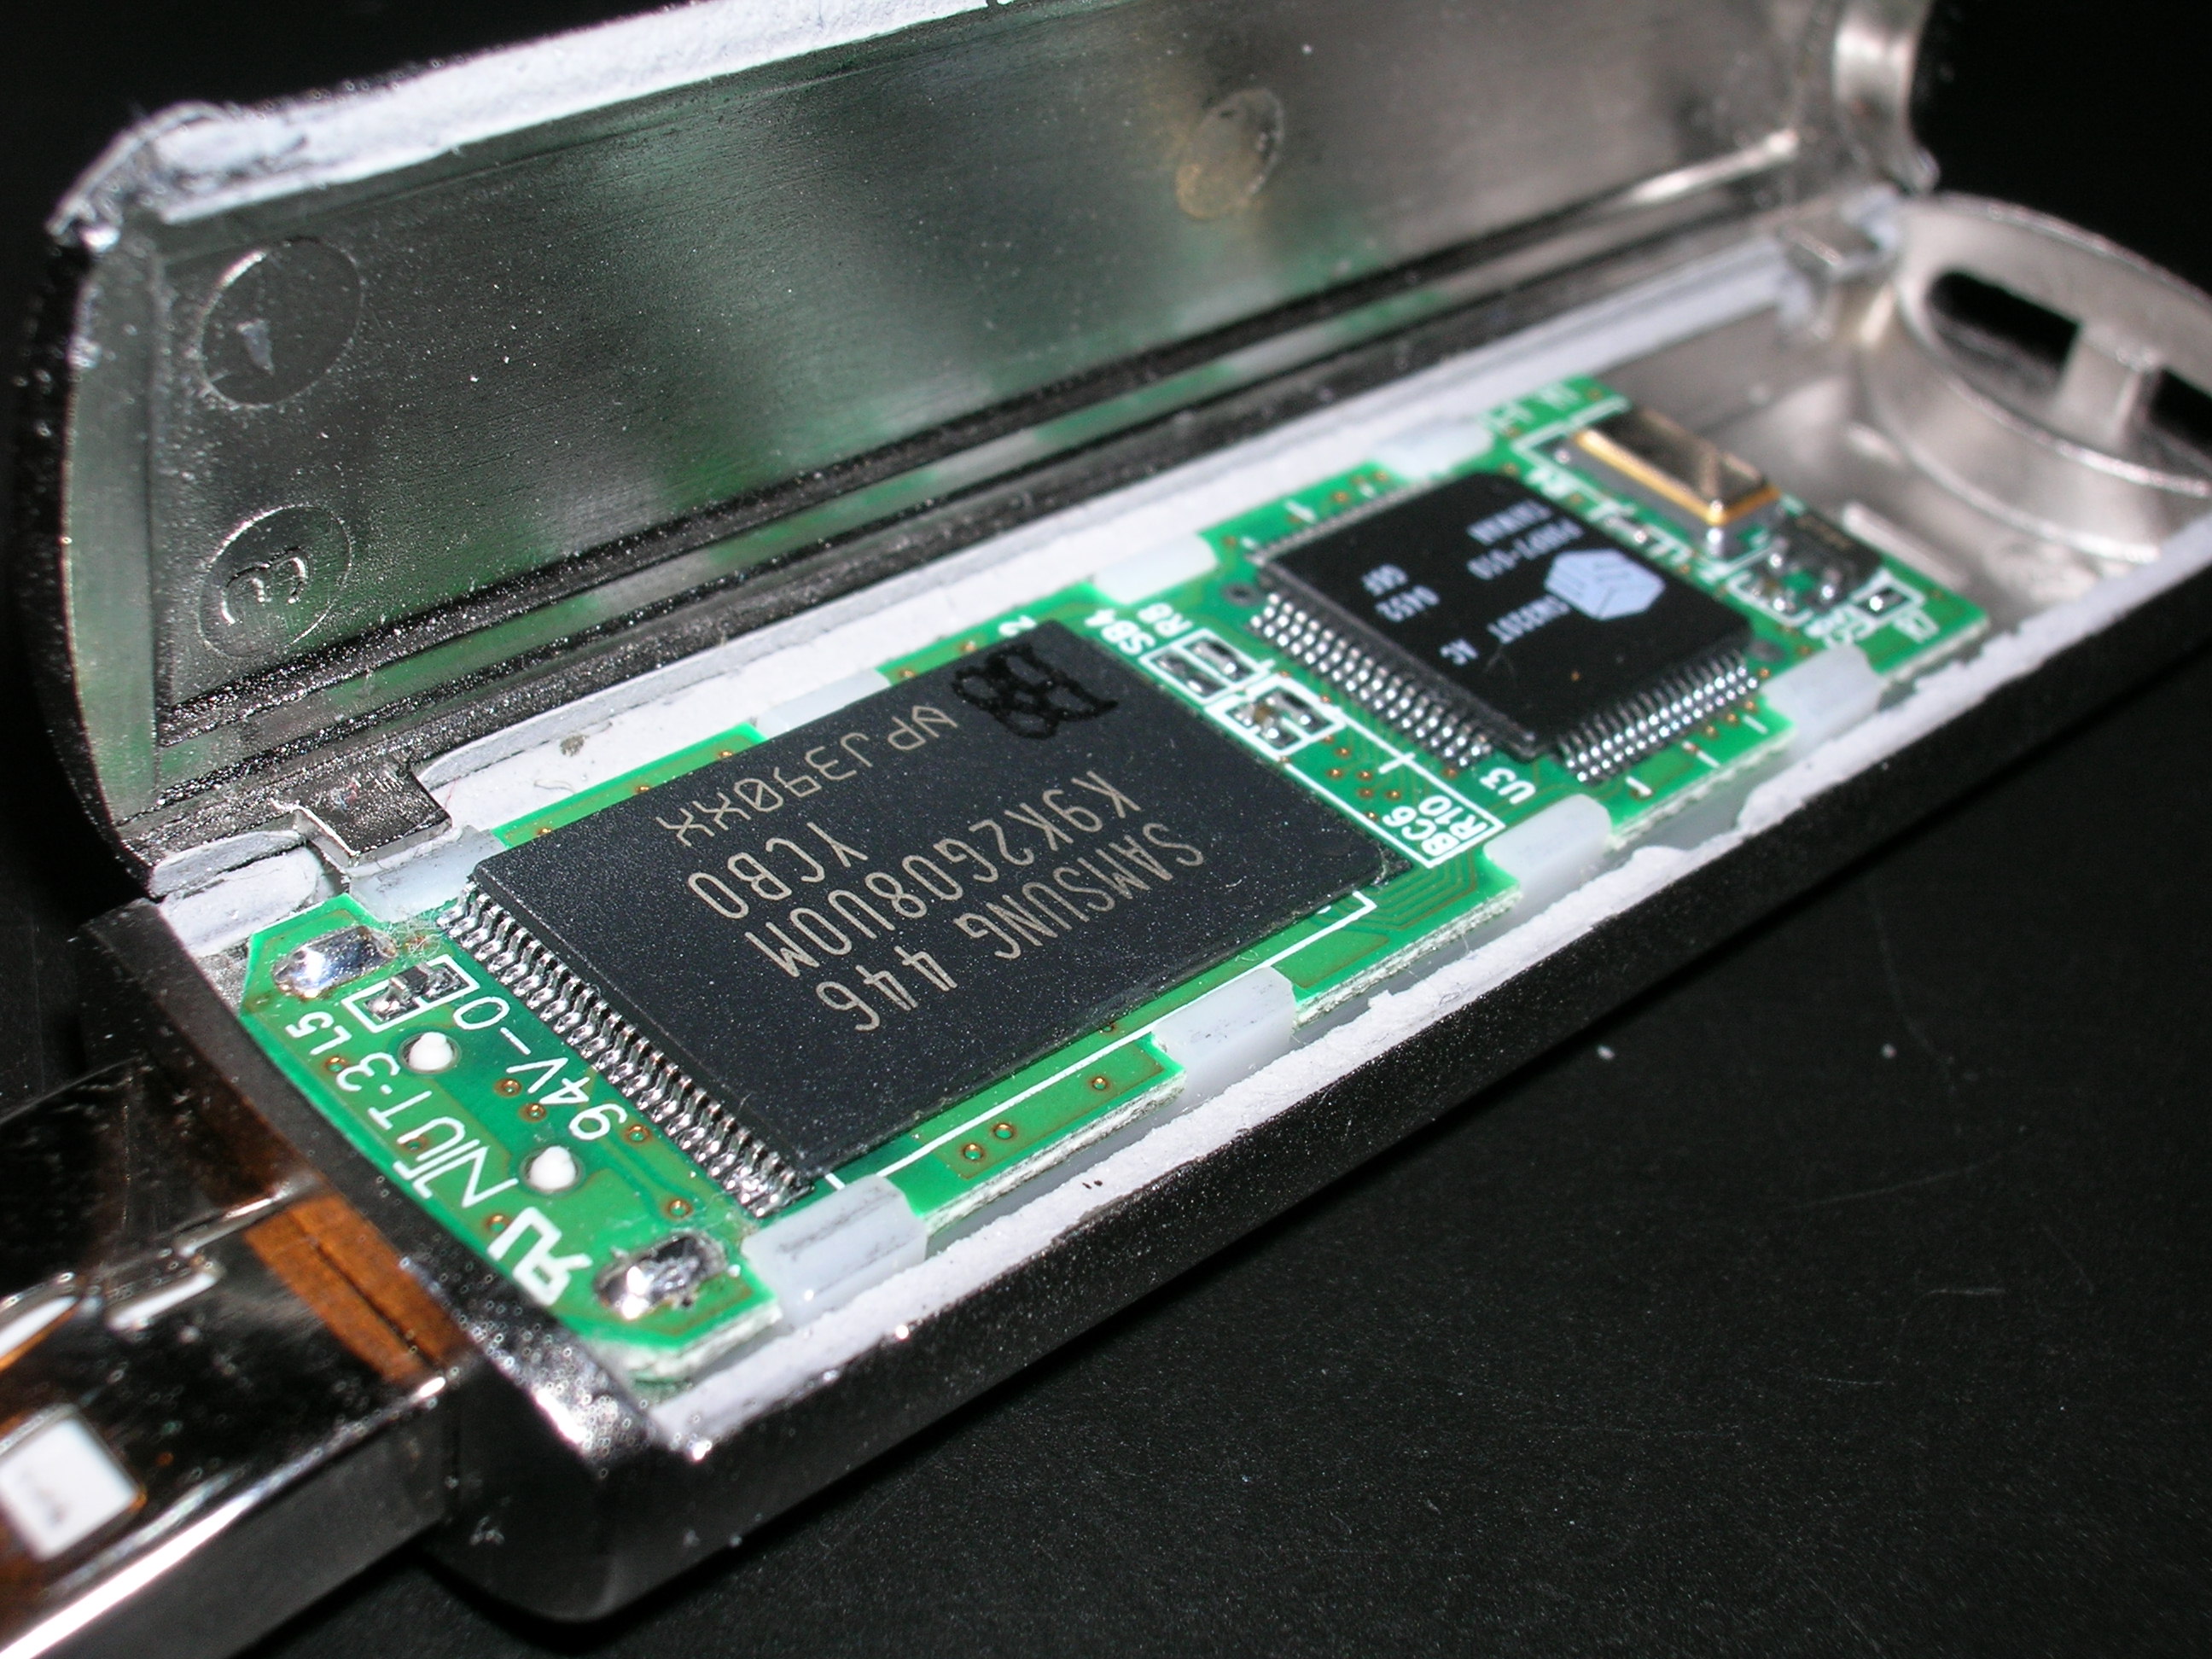 If the drive is accessible on the other computer, the issue may lie with the motherboard or other hardware components.
If the drive is still inaccessible, it may indicate a faulty hard drive.